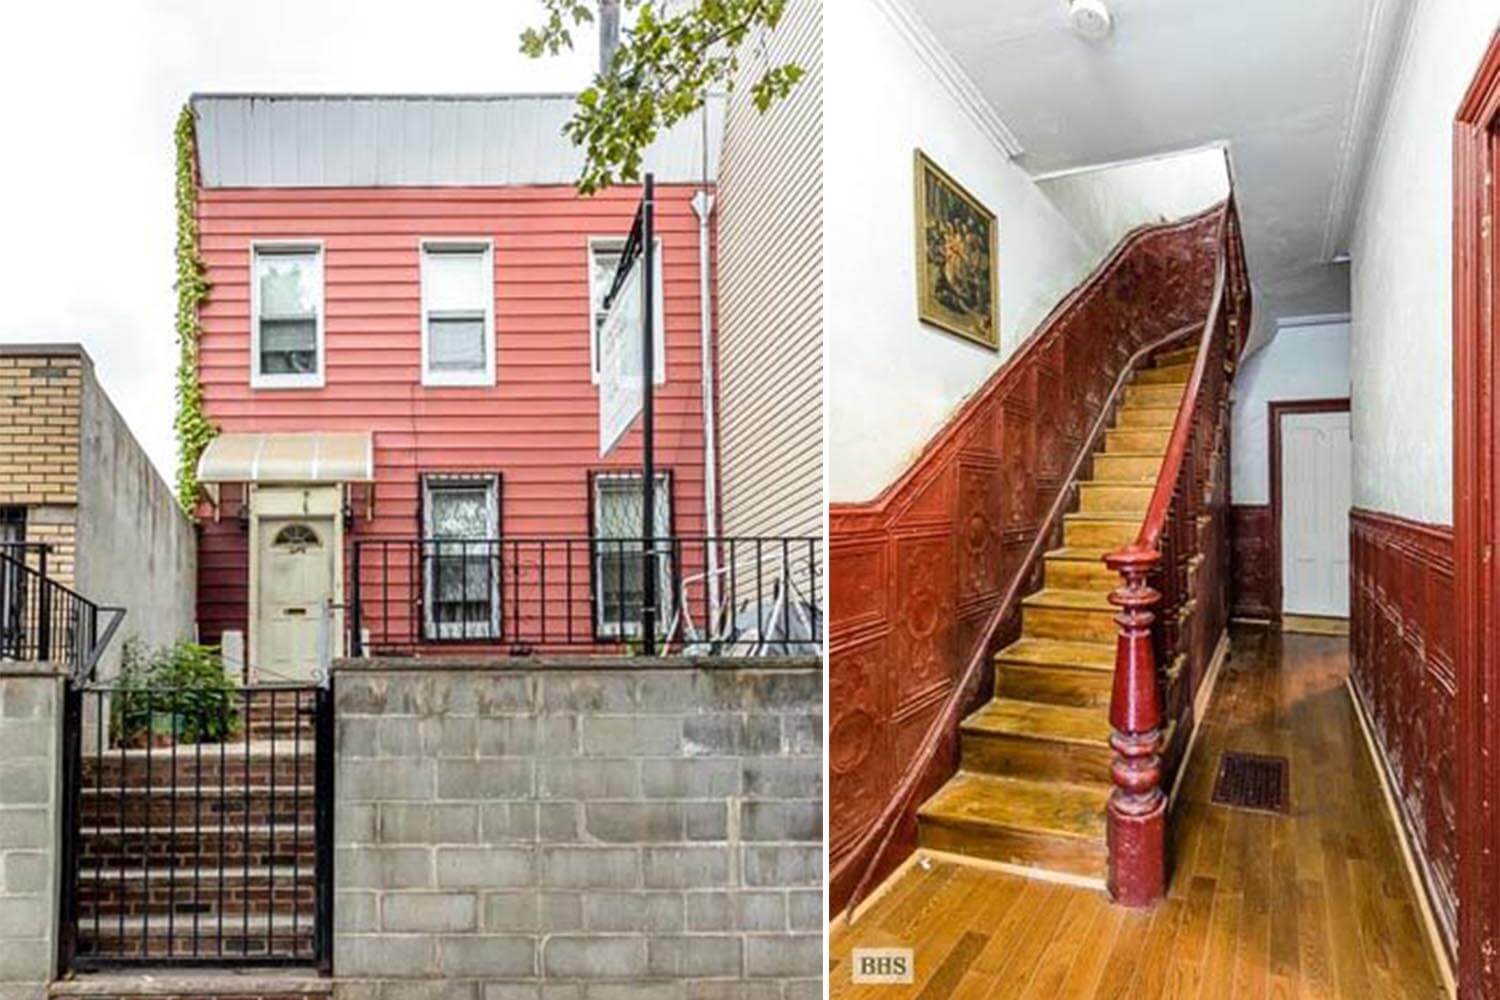 Brooklyn Real Estate homes for sale